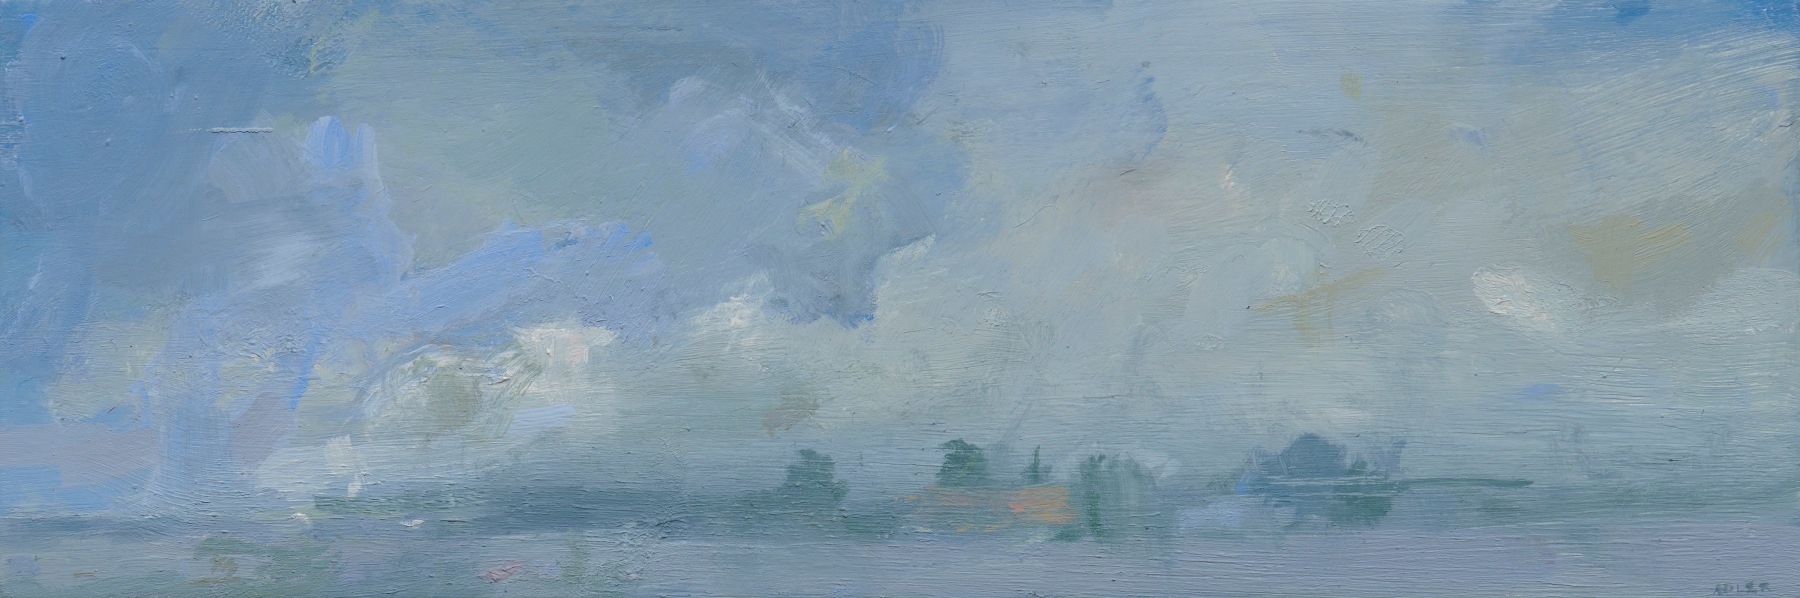 Laura Adler

&amp;quot;Shoreline with Clouds,&amp;quot; 2020

oil on panel

4 x 12 in.